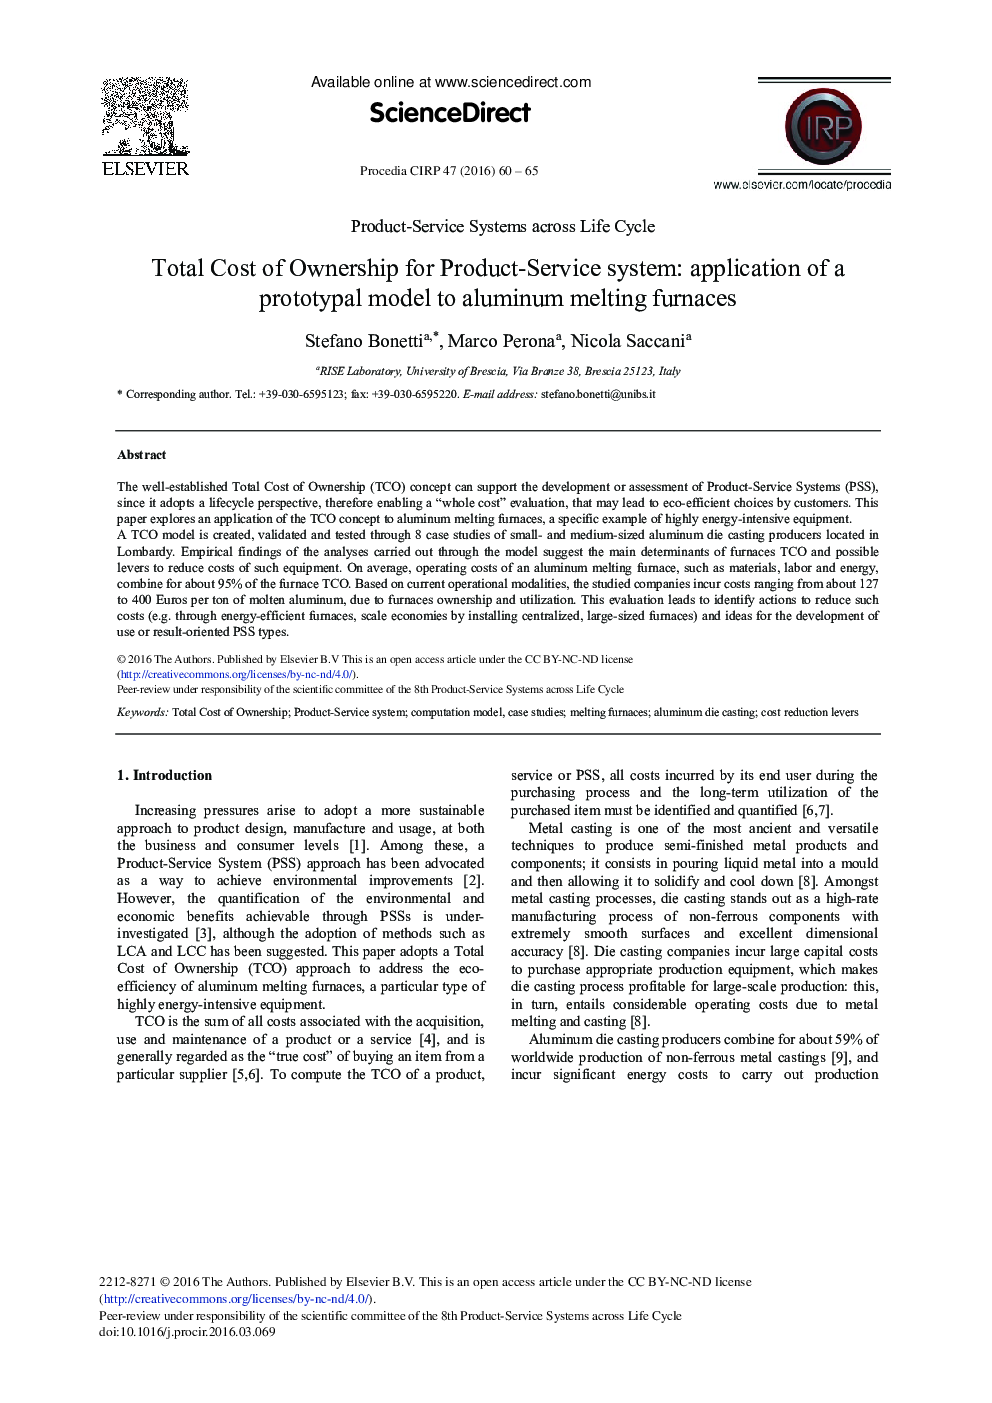 Total Cost of Ownership for Product-Service System: Application of a Prototypal Model to Aluminum Melting Furnaces 